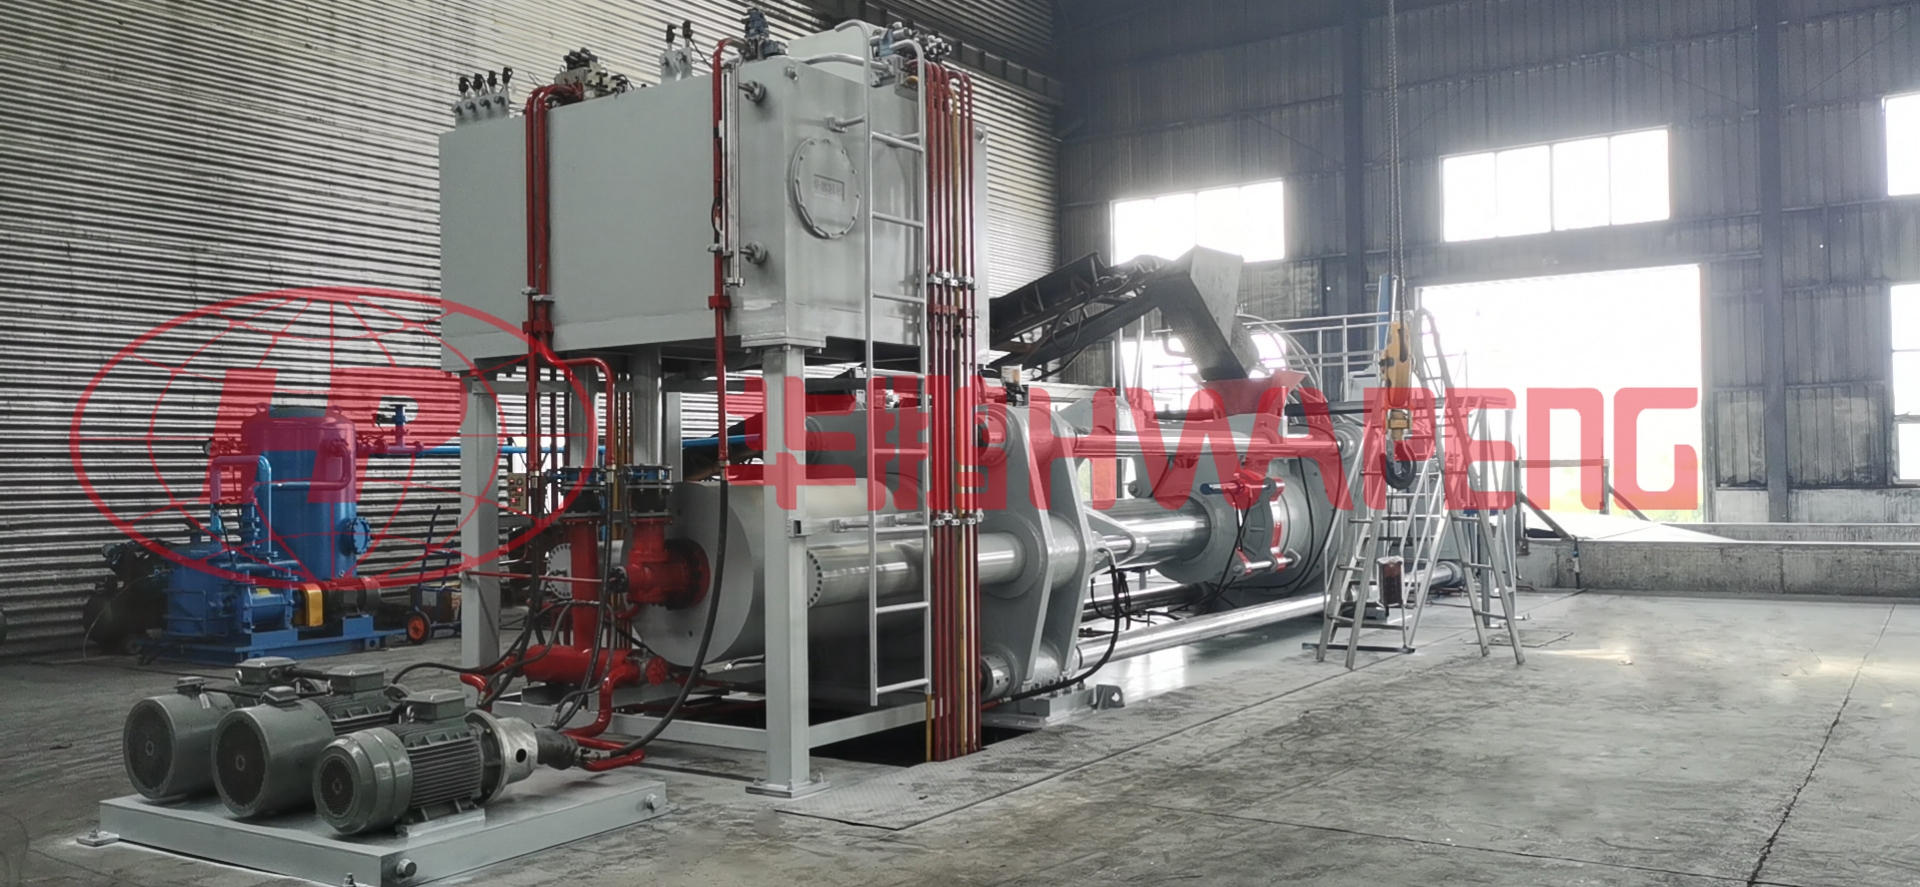 Application of 1500T extrusion press in production of graphite electrode